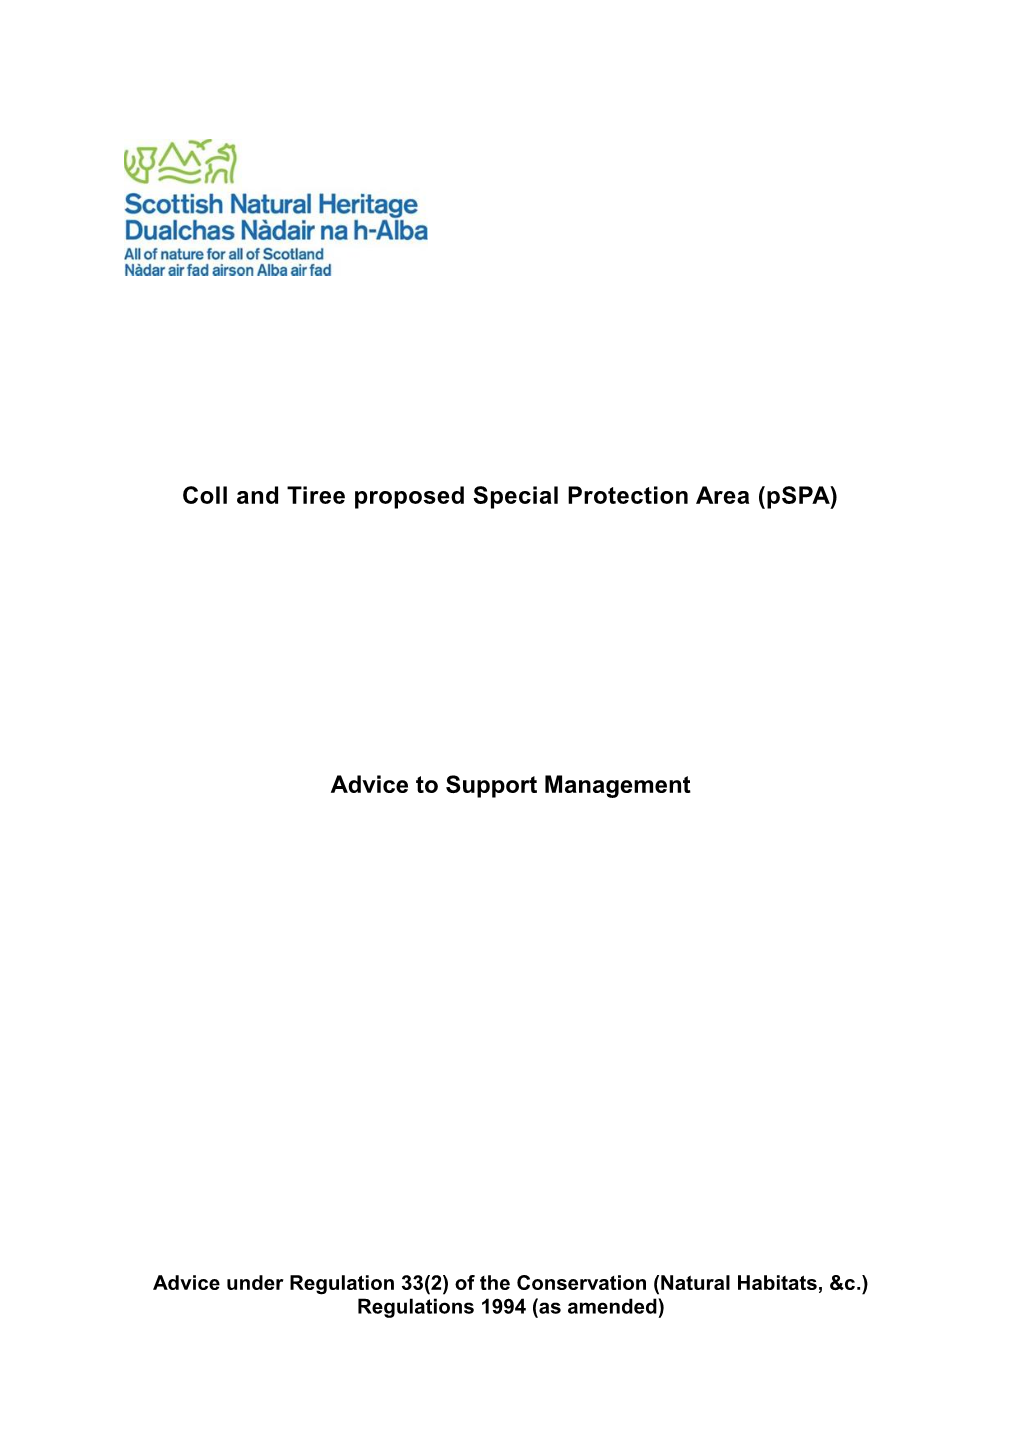 Coll and Tiree Proposed Special Protection Area (Pspa)